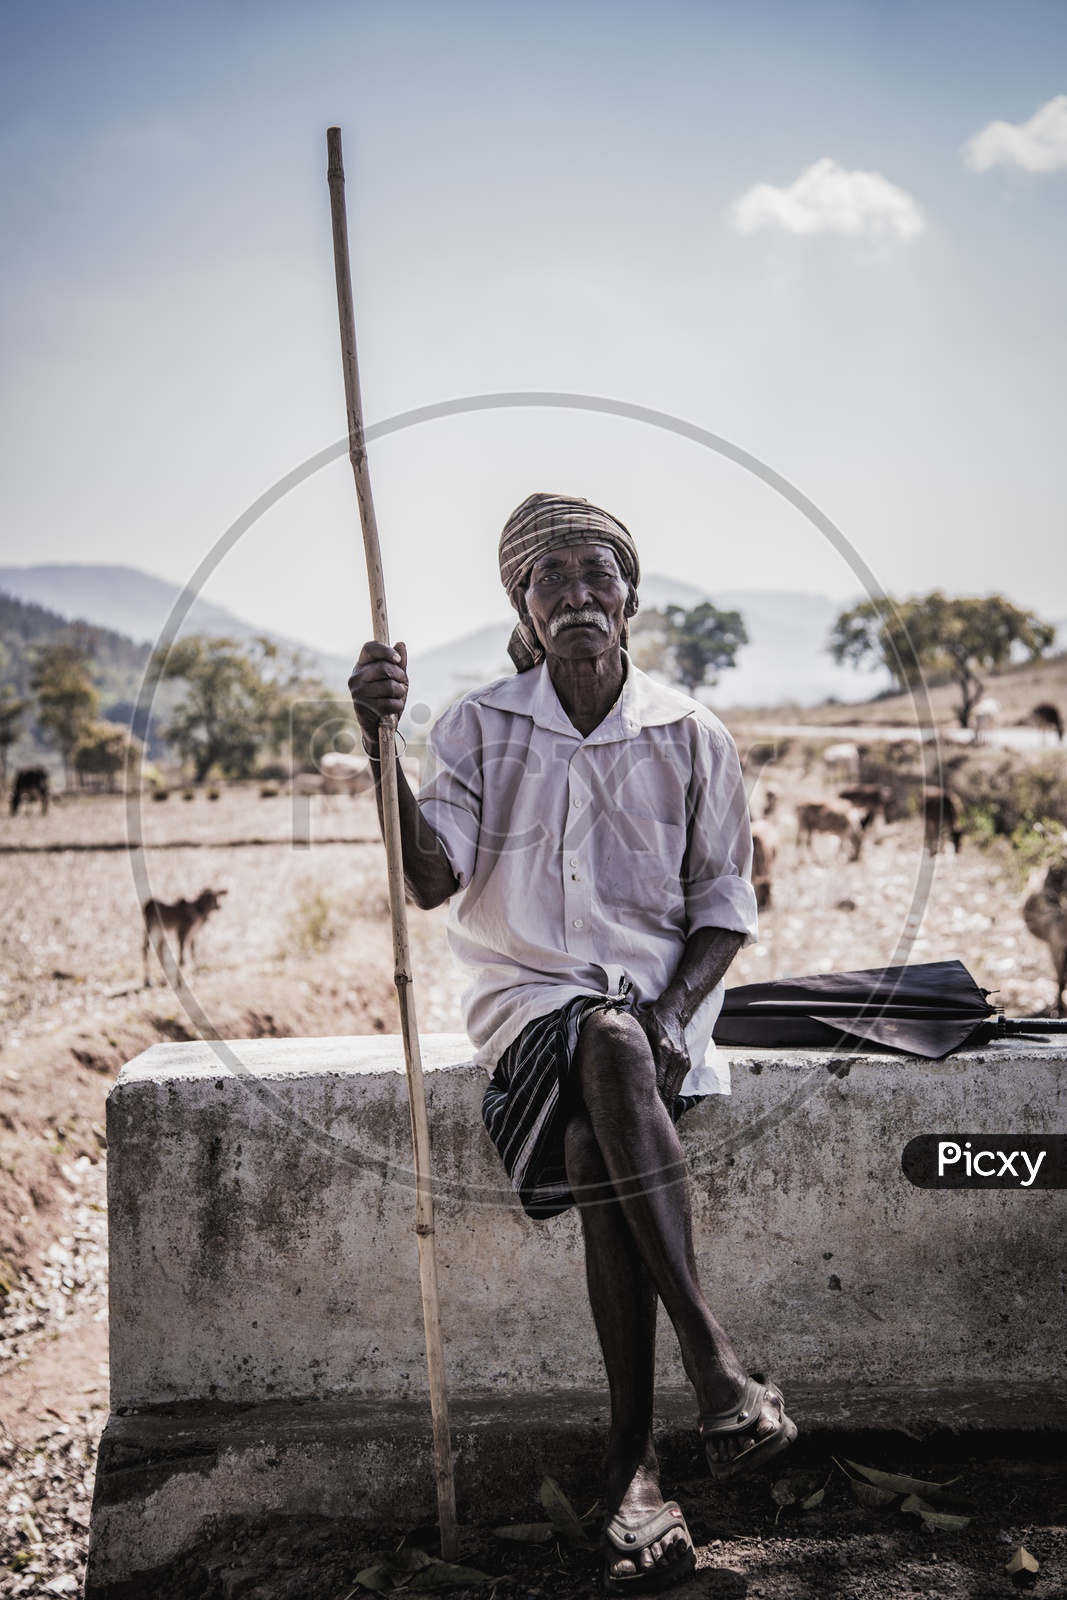 An Old Man Or farmer In Rural Villages of India